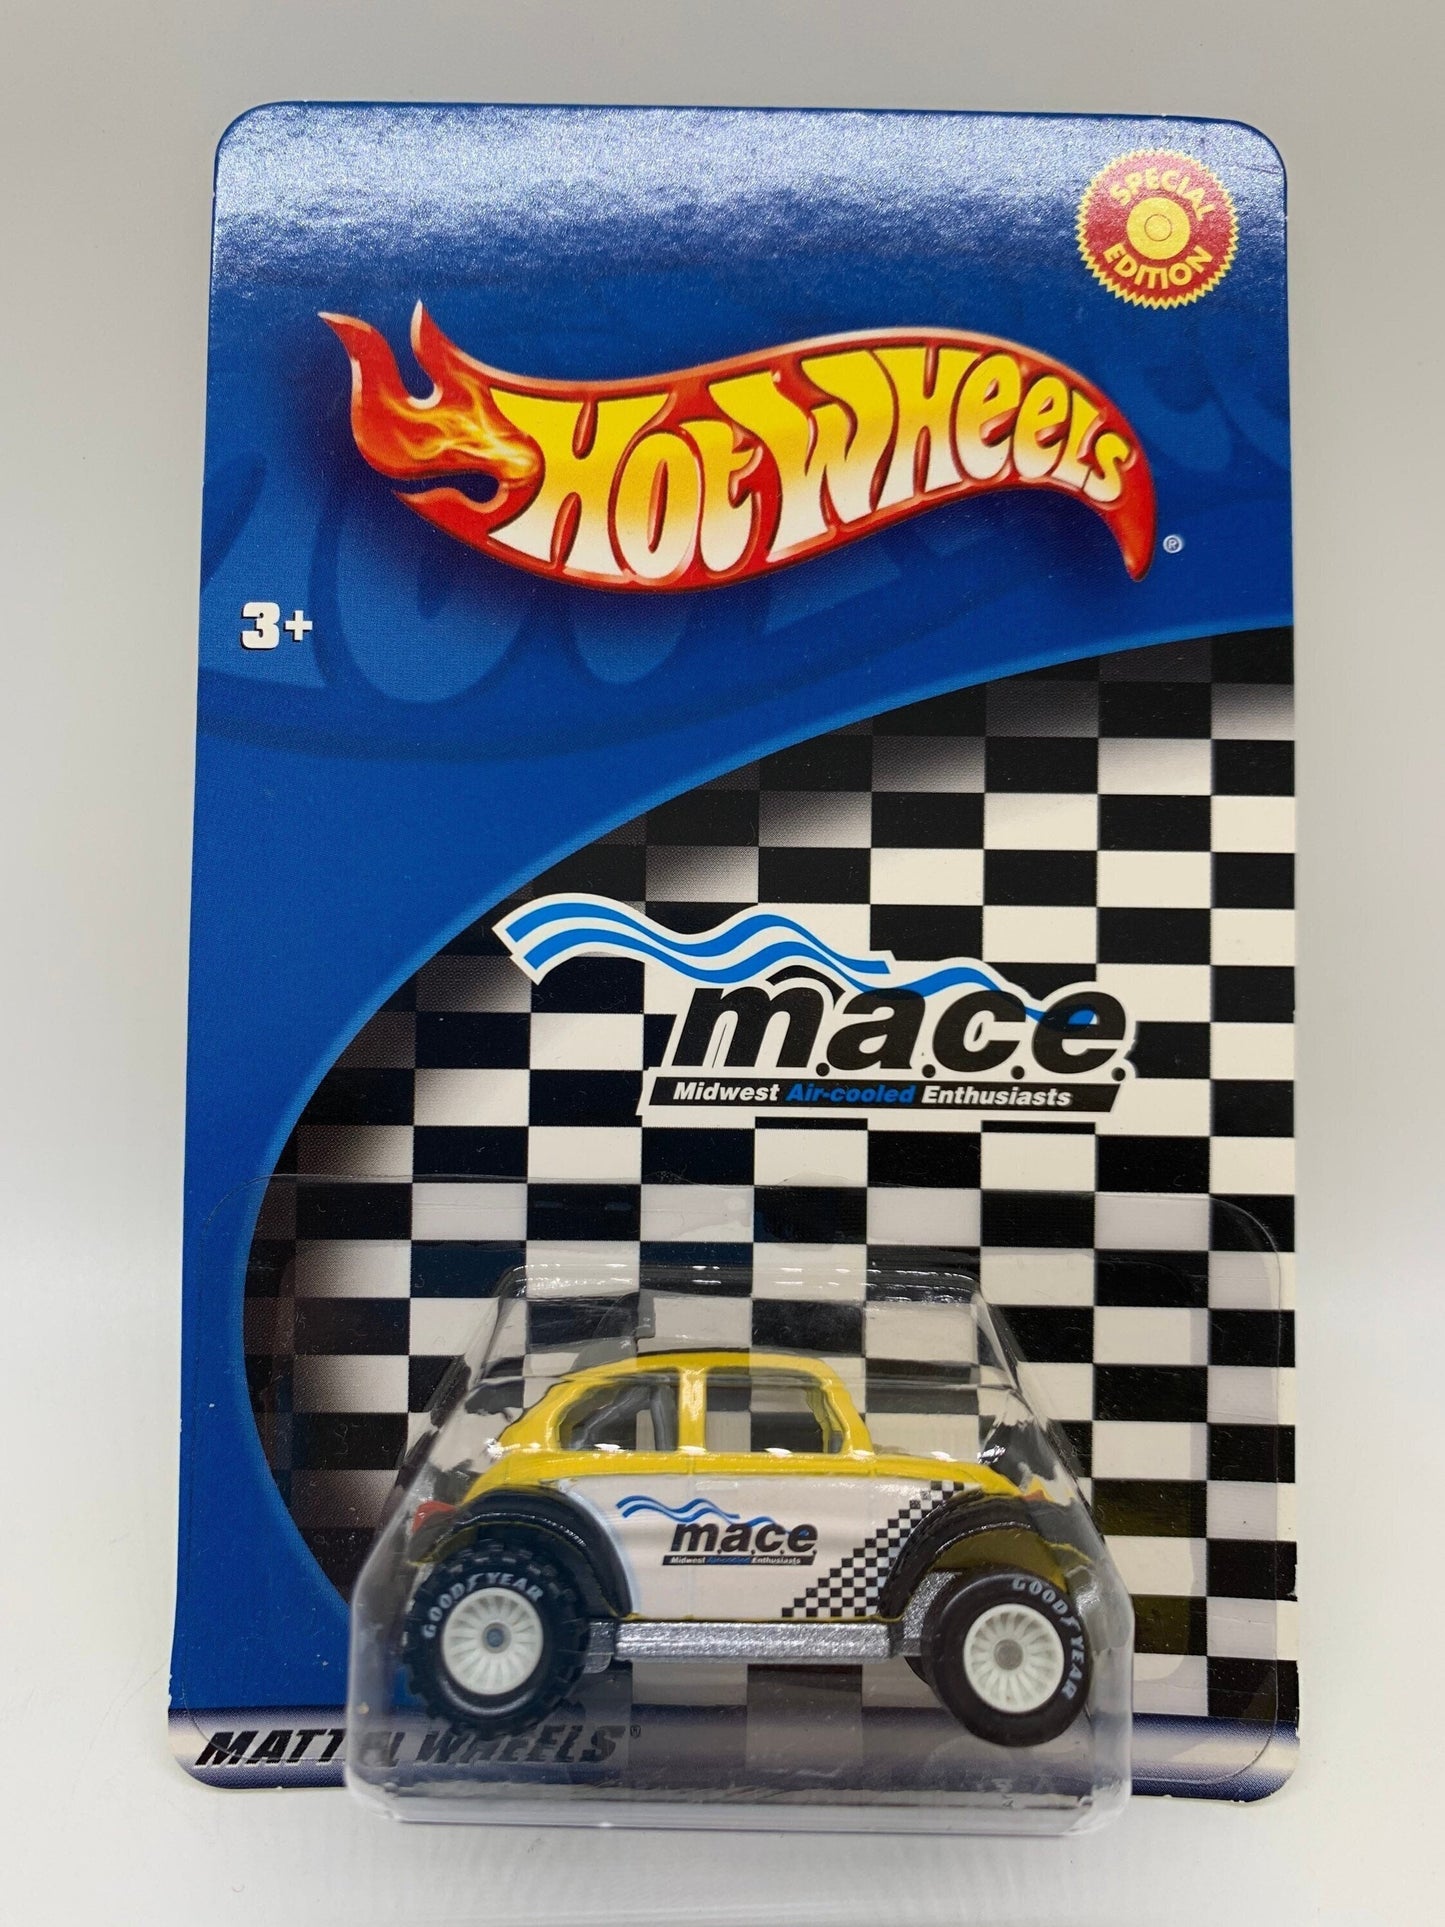 Hot Wheels Baja Bug Volkswagen Beetle Yellow Mace Collectable Miniature Scale Model Toy Car Perfect Birthday Gift